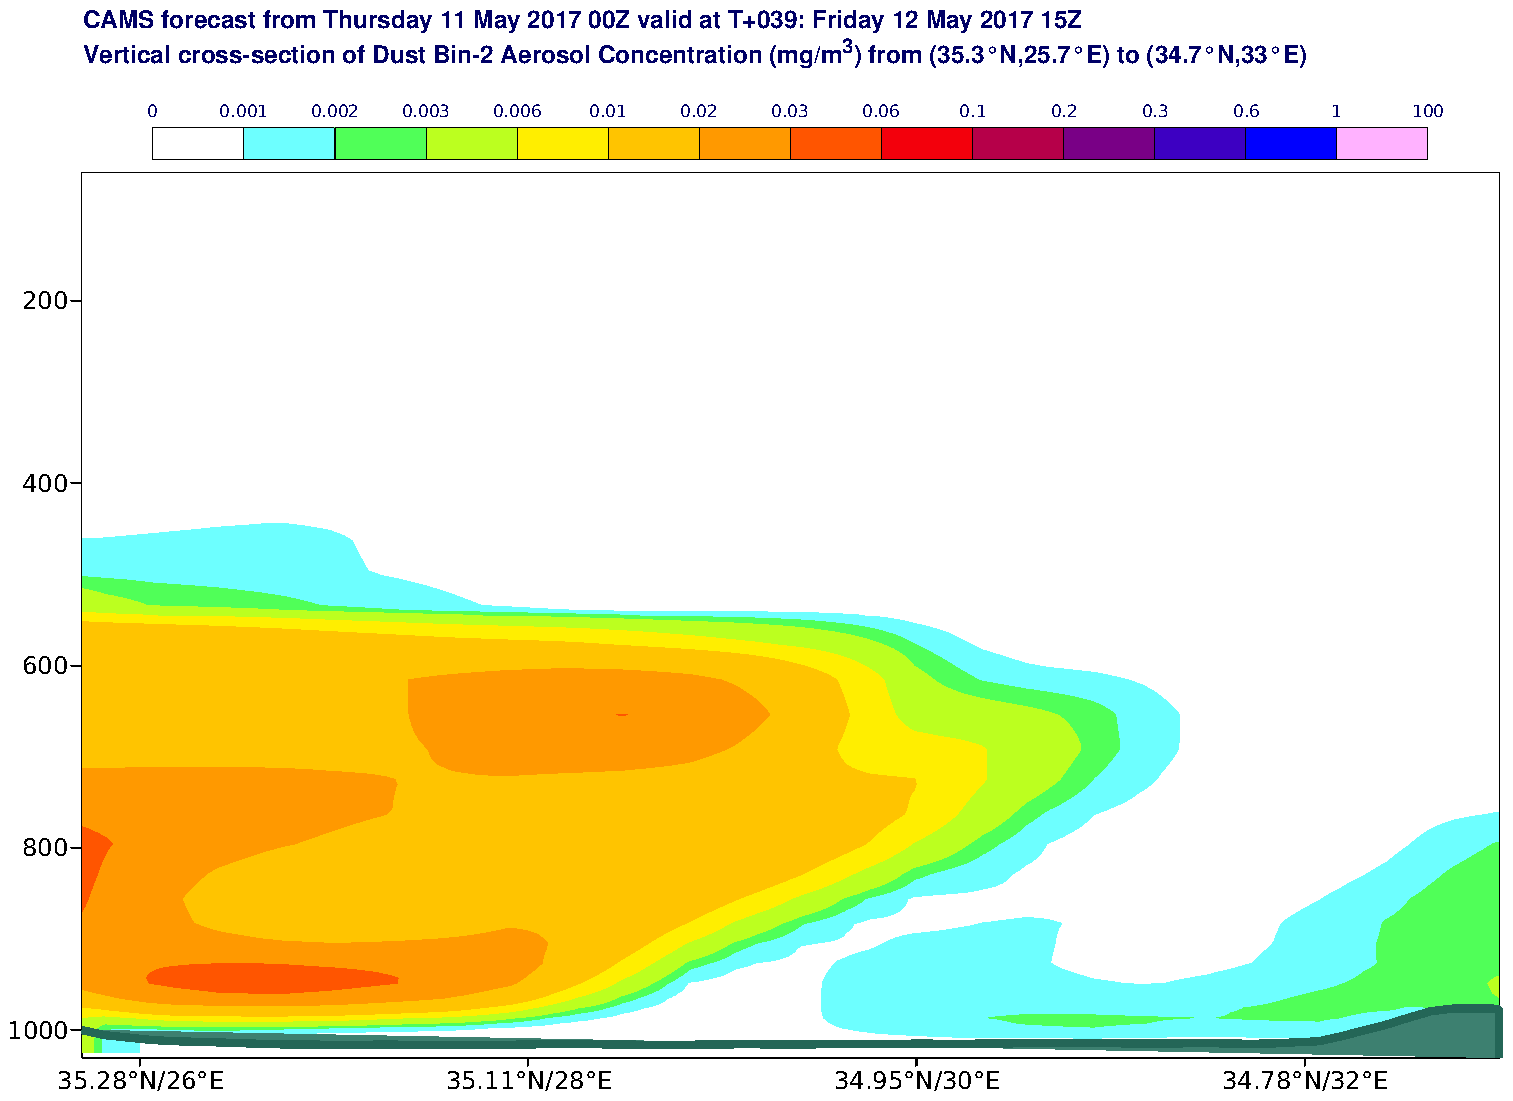 Vertical cross-section of Dust Bin-2 Aerosol Concentration (mg/m3) valid at T39 - 2017-05-12 15:00